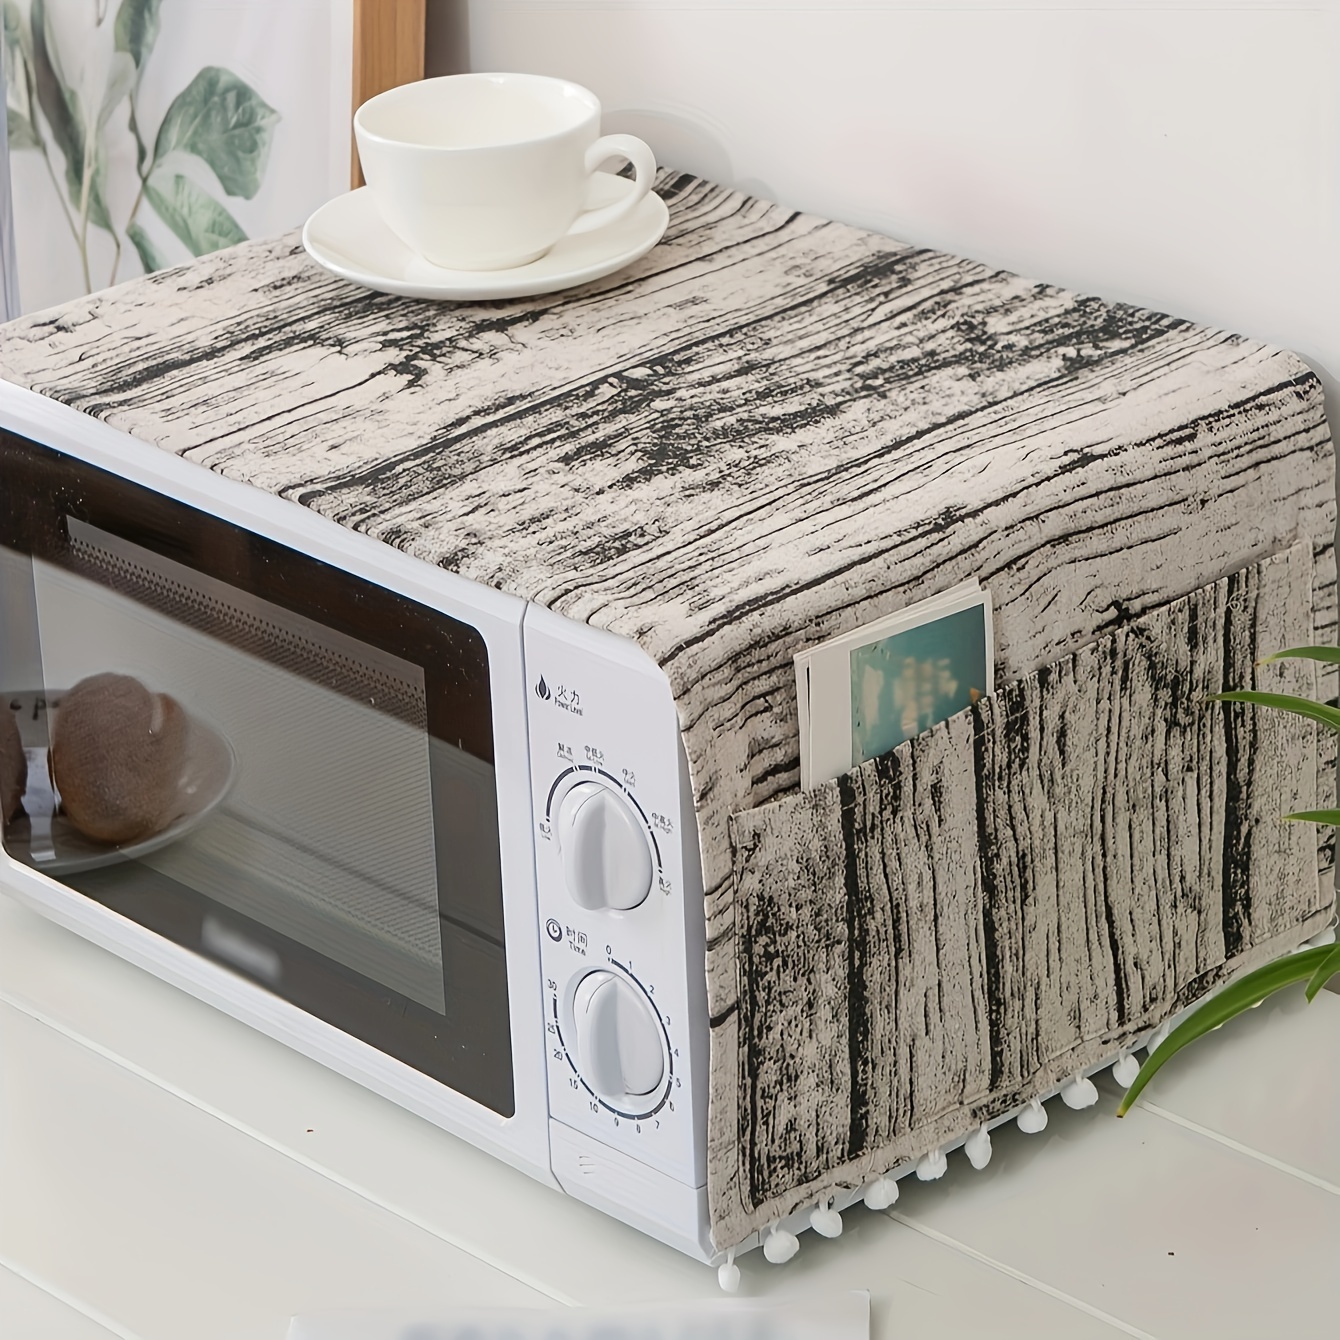 Waterproof PVC Microwave Cover Oilproof Microwave Oven Dust Cover For  Storage Bag Kitchen Accessories PVC Top